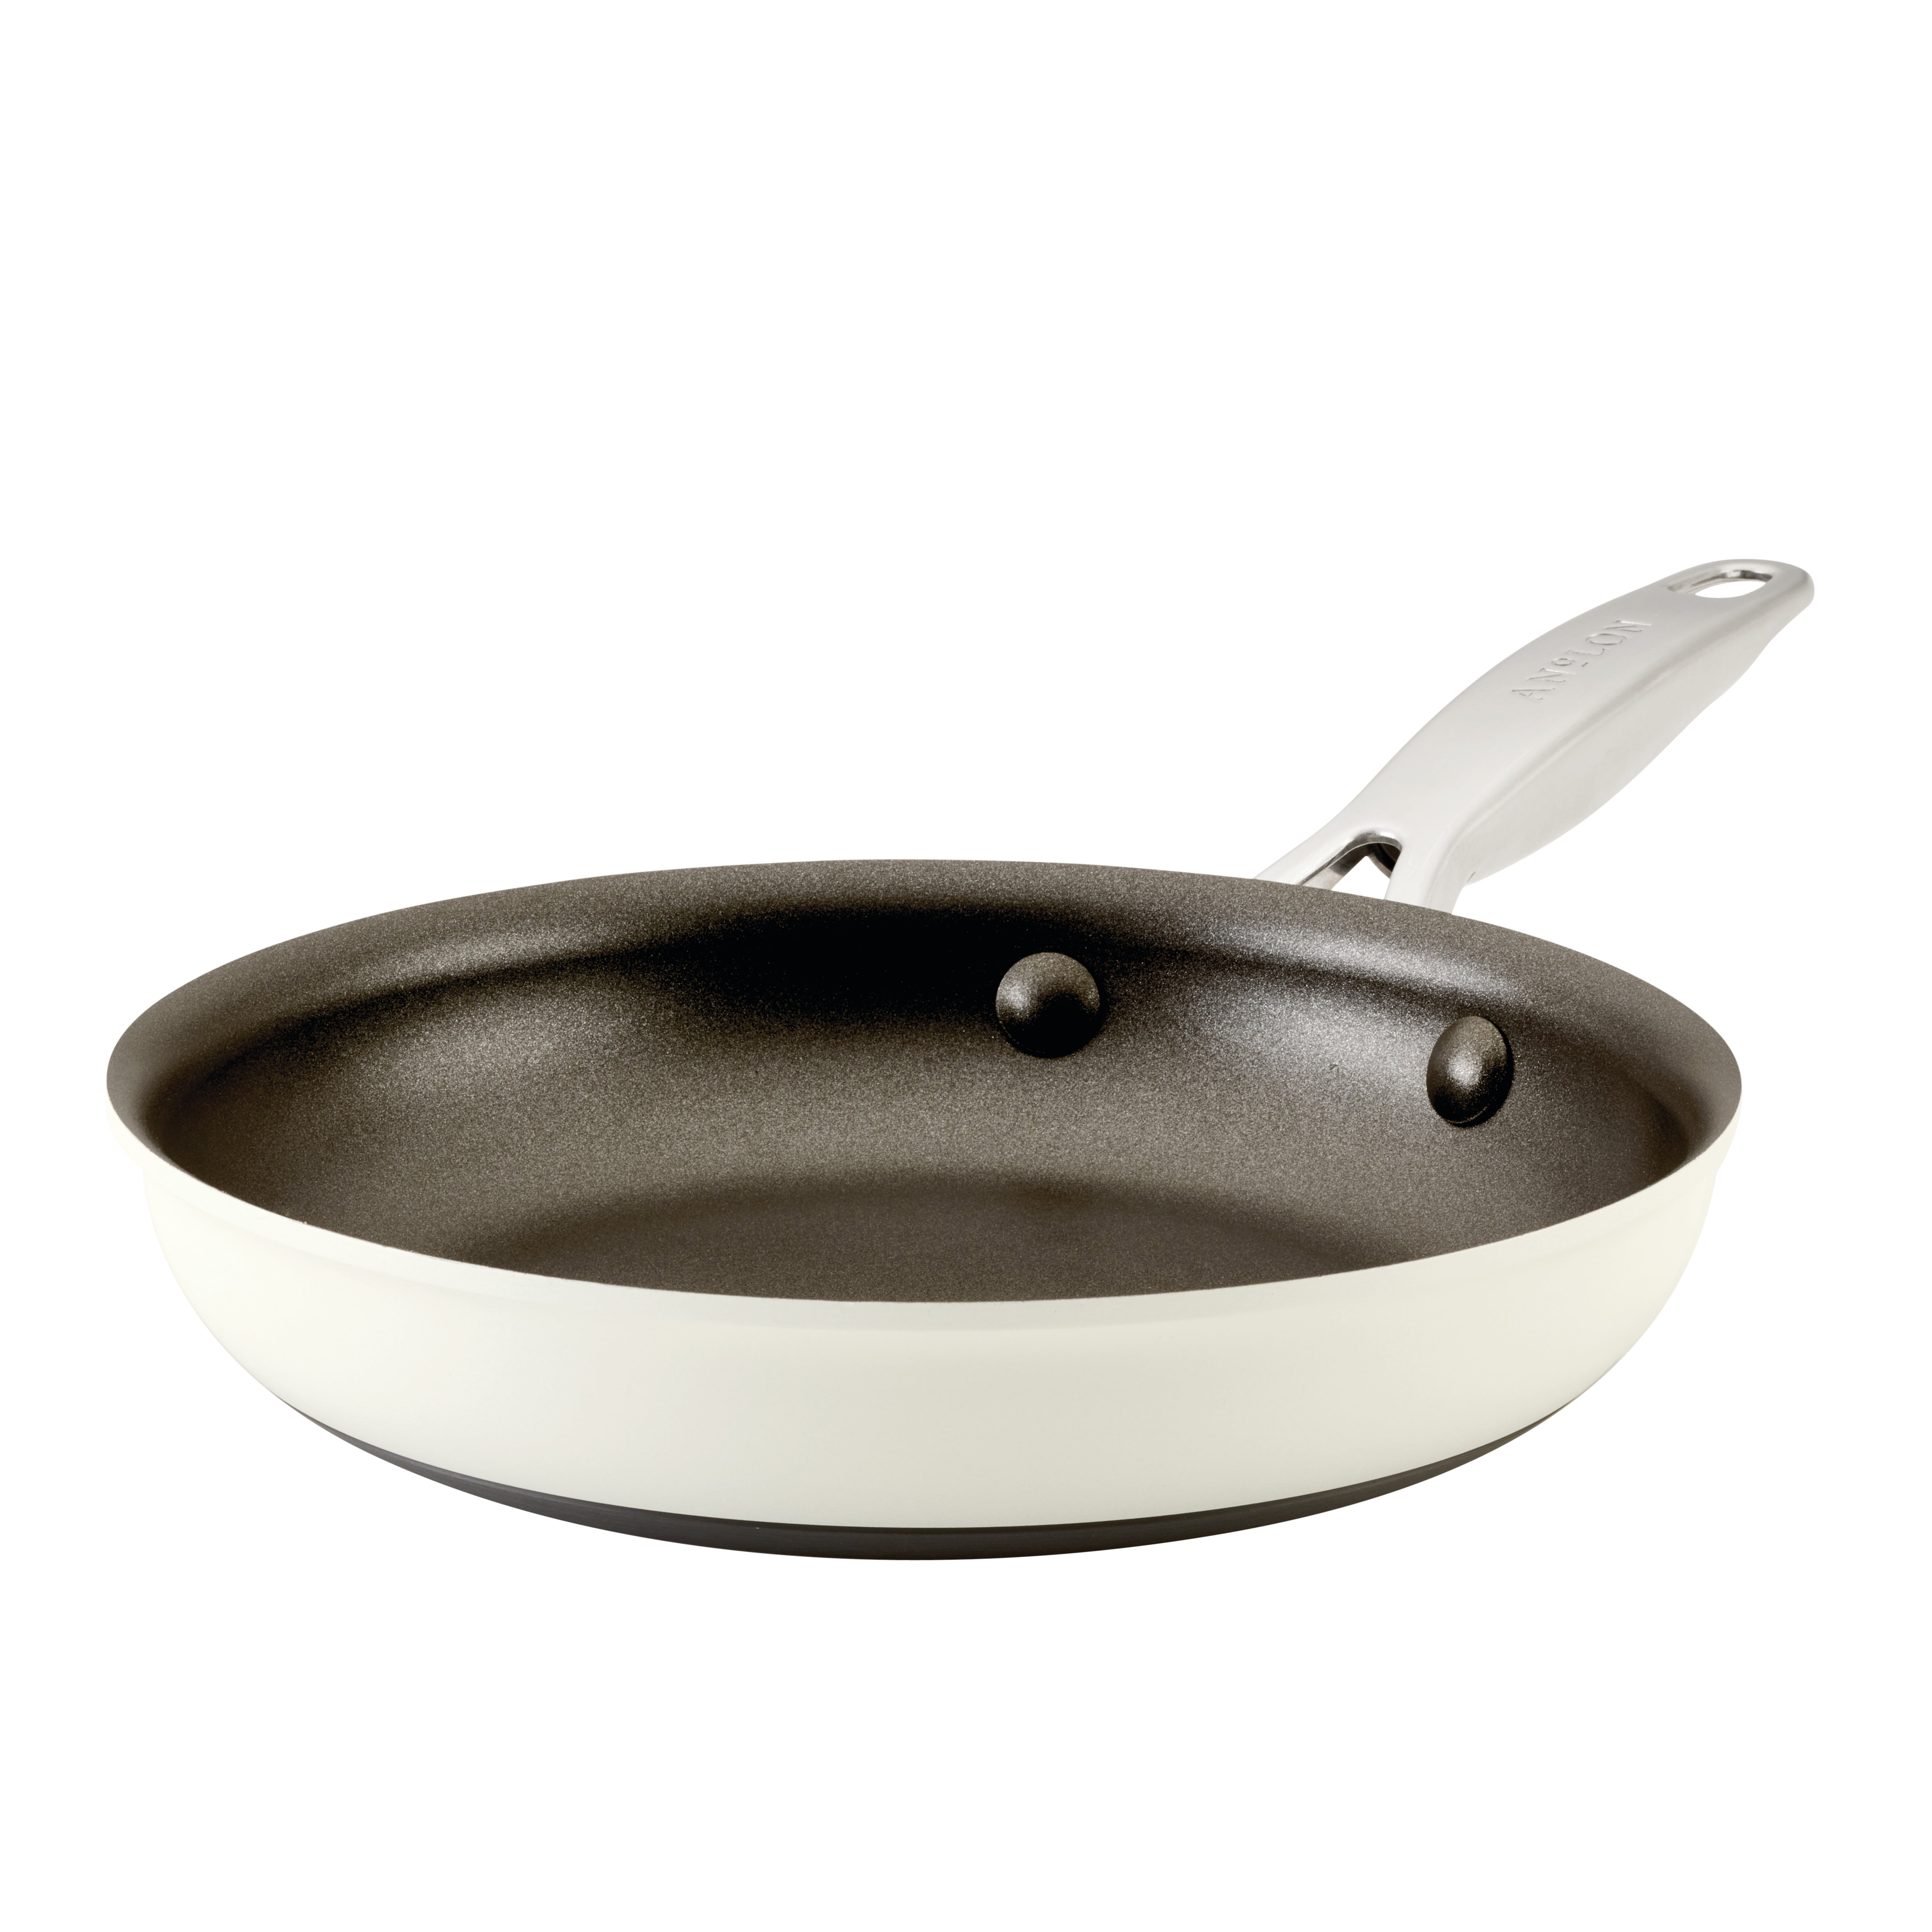 Pampered Chef 8.5 (22-cm) Stainless Steel Nonstick Skillet